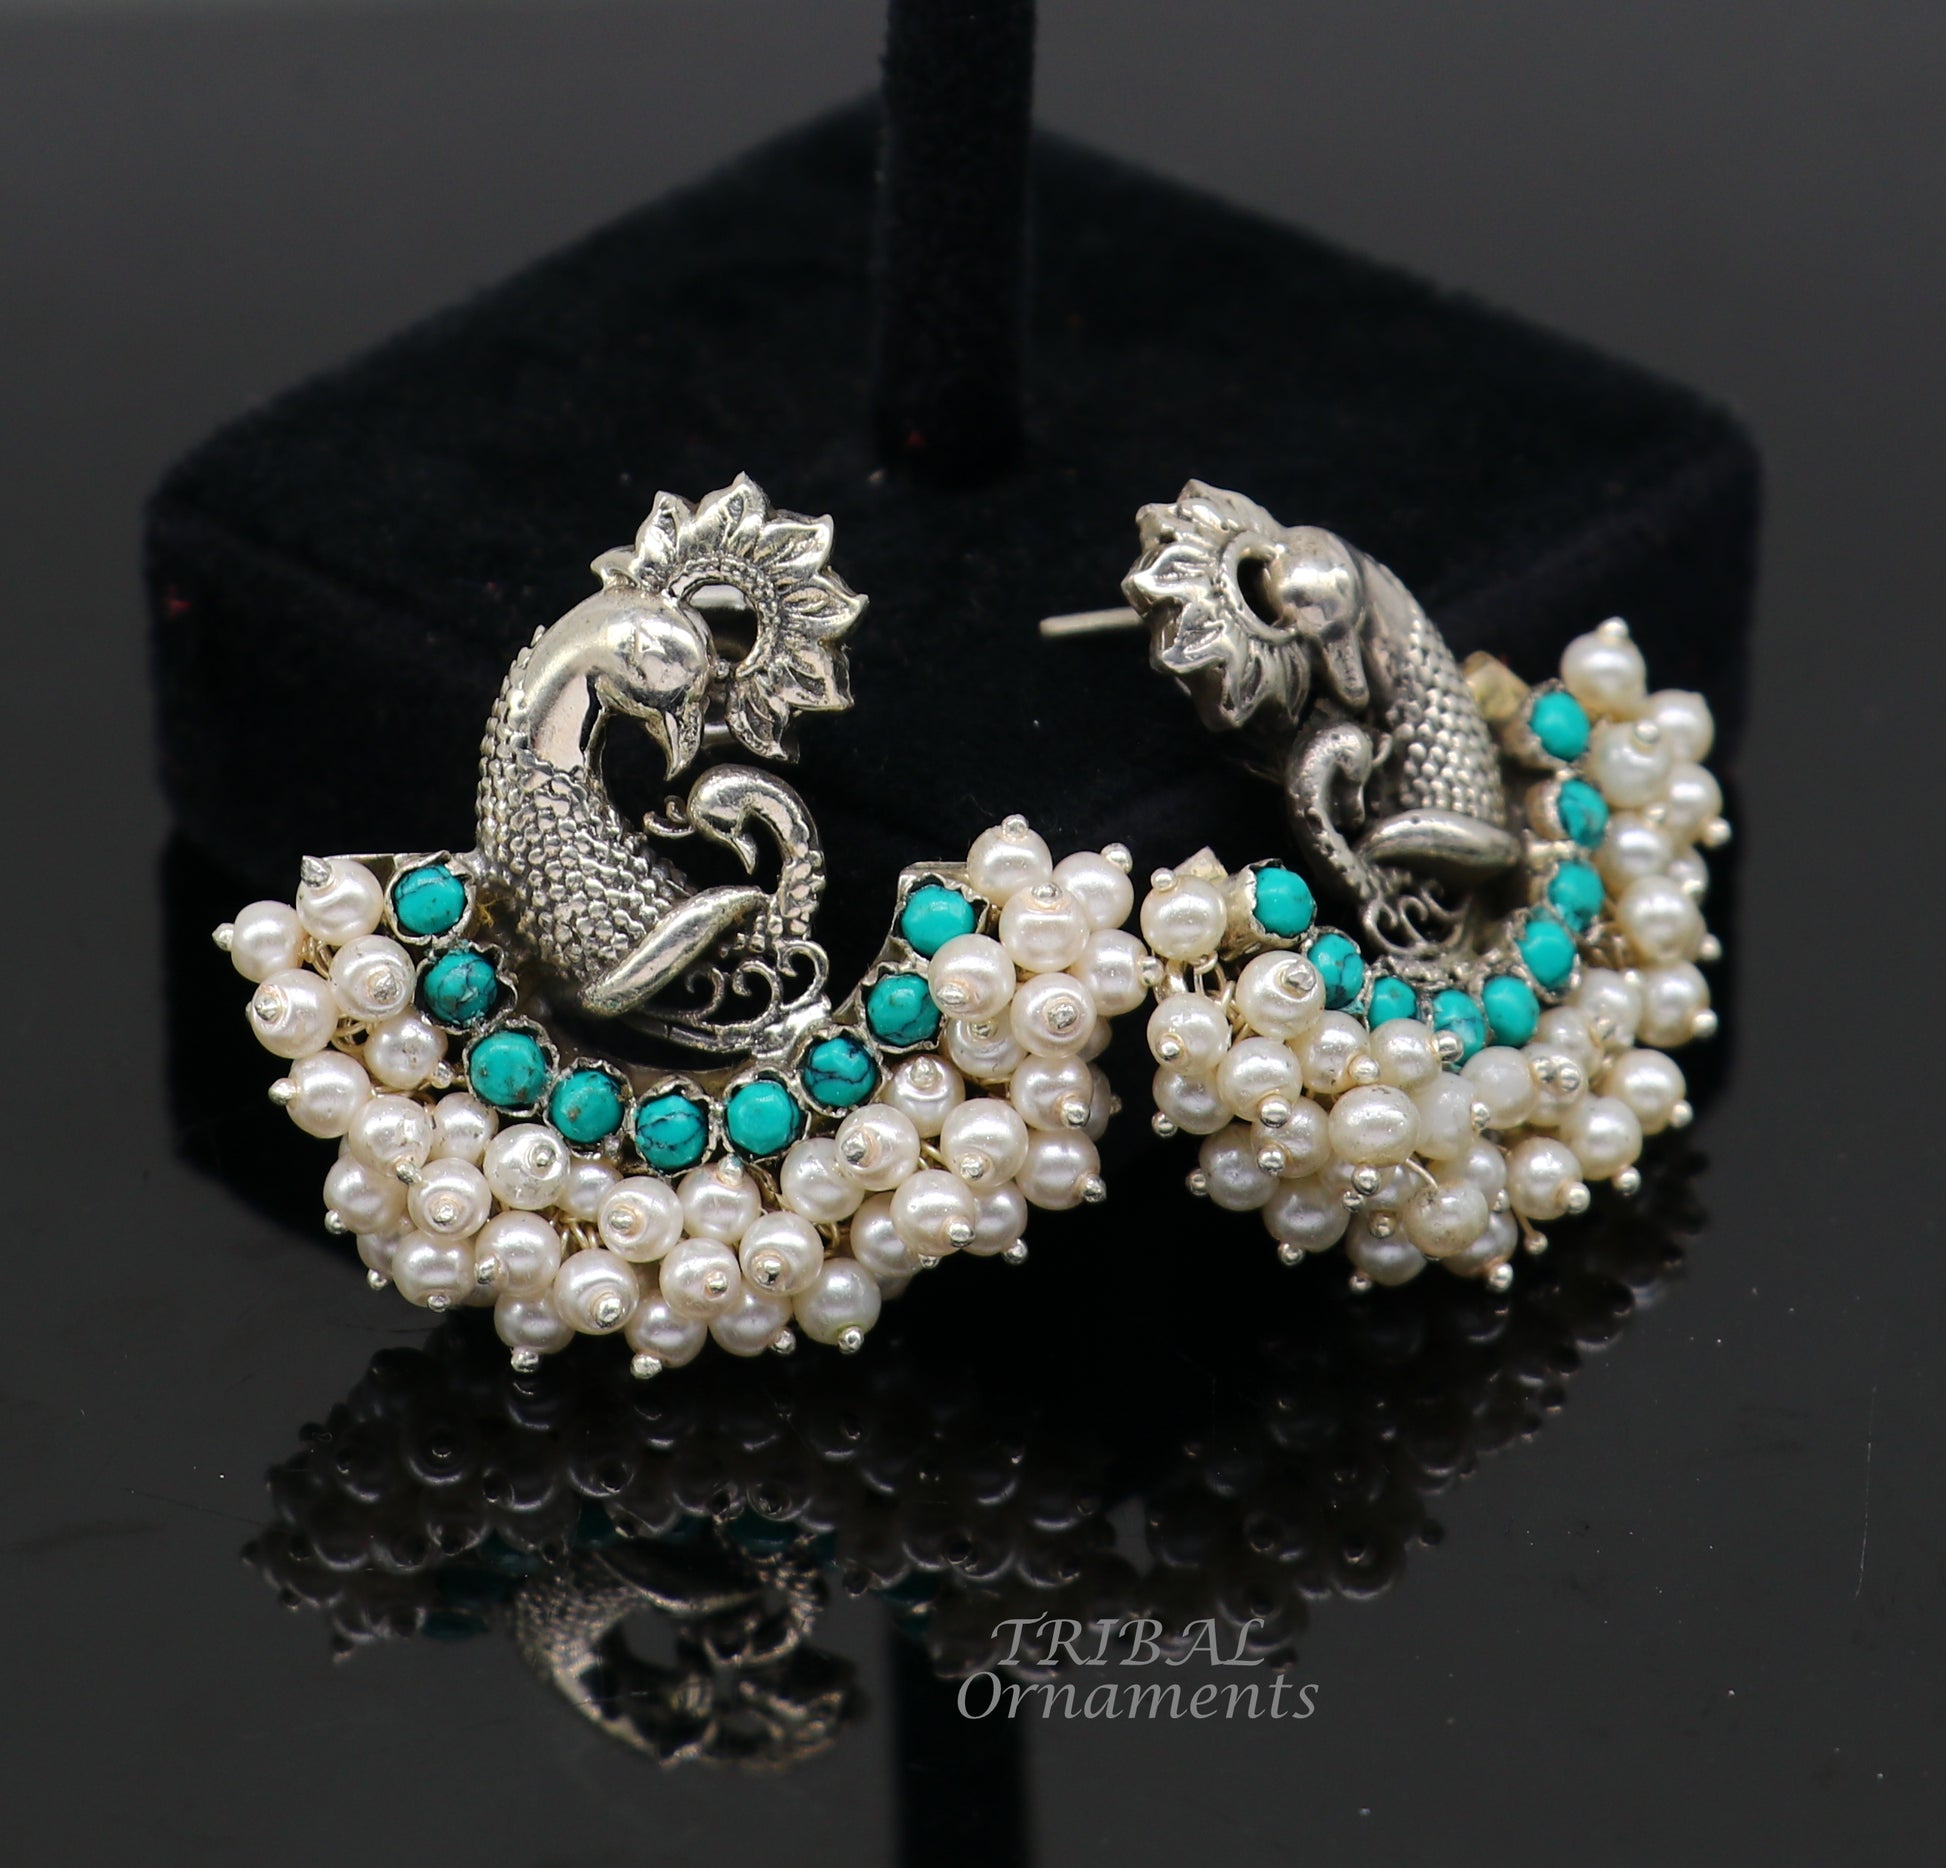 925 sterling silver handmade vintage antique design peacock stud earring fabulous hanging pearl and Green onyx stone earring jewelry s708 - TRIBAL ORNAMENTS